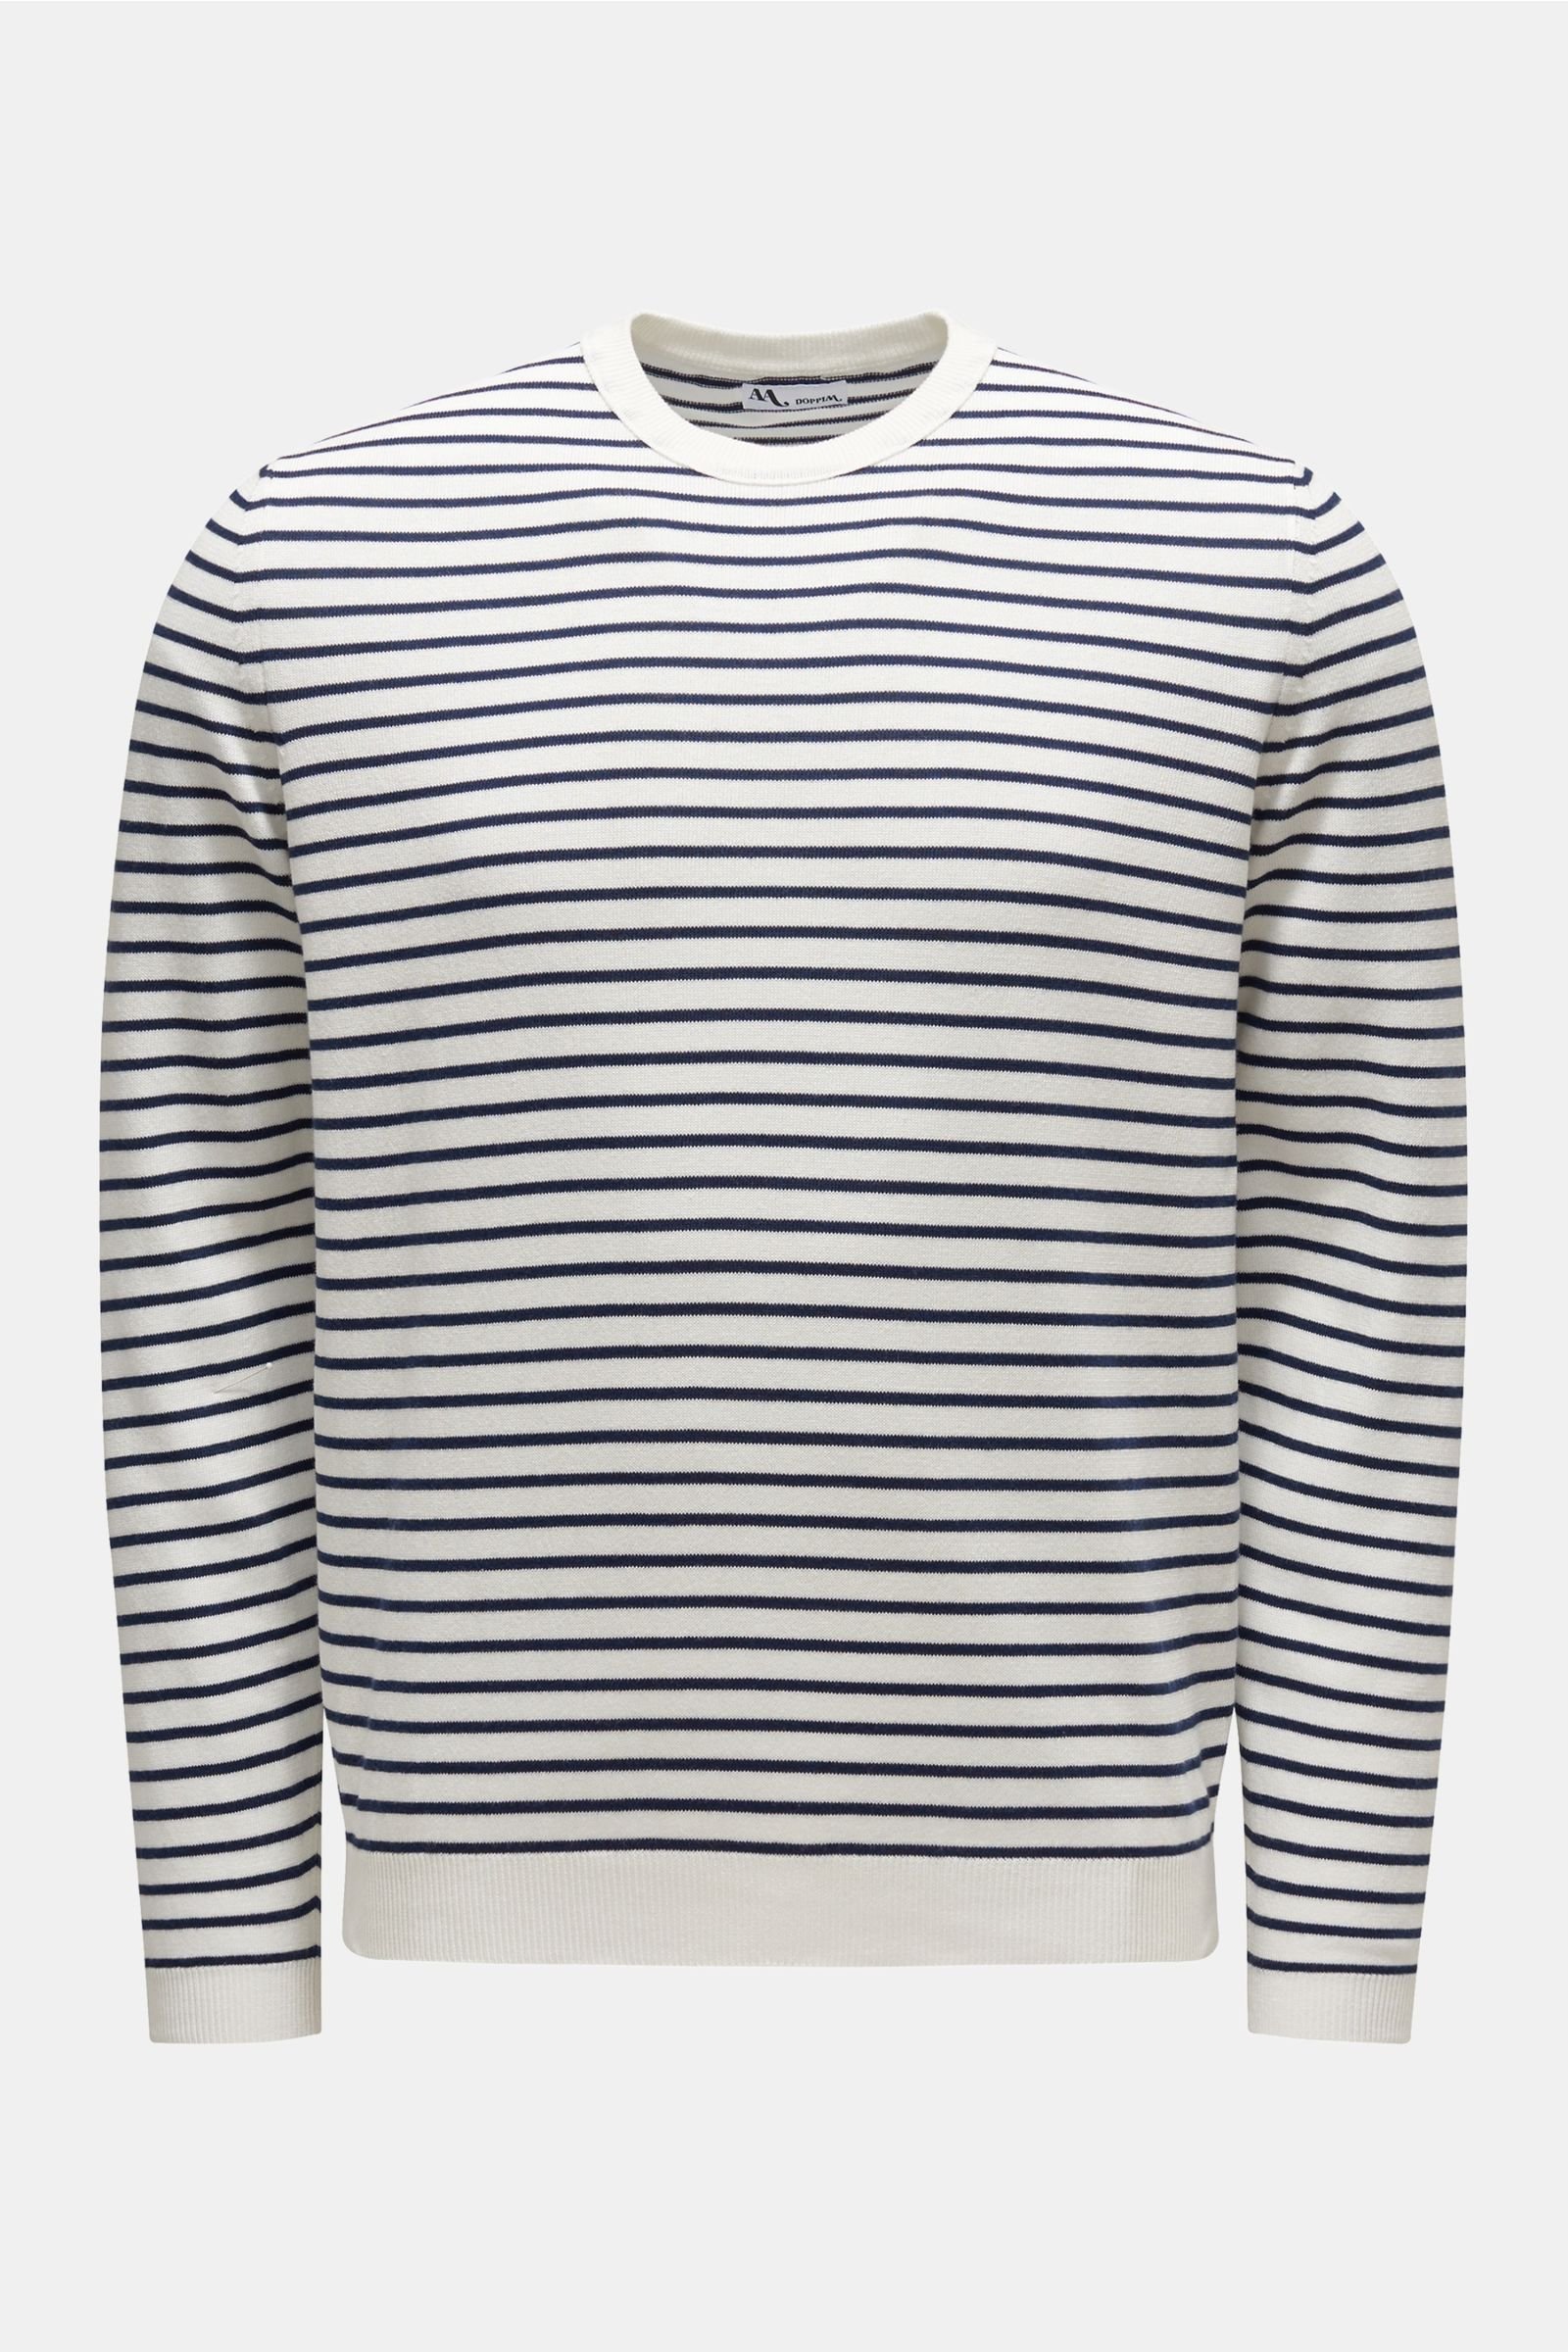 R-Neck Pullover 'Aabacco' offwhite/navy gestreift